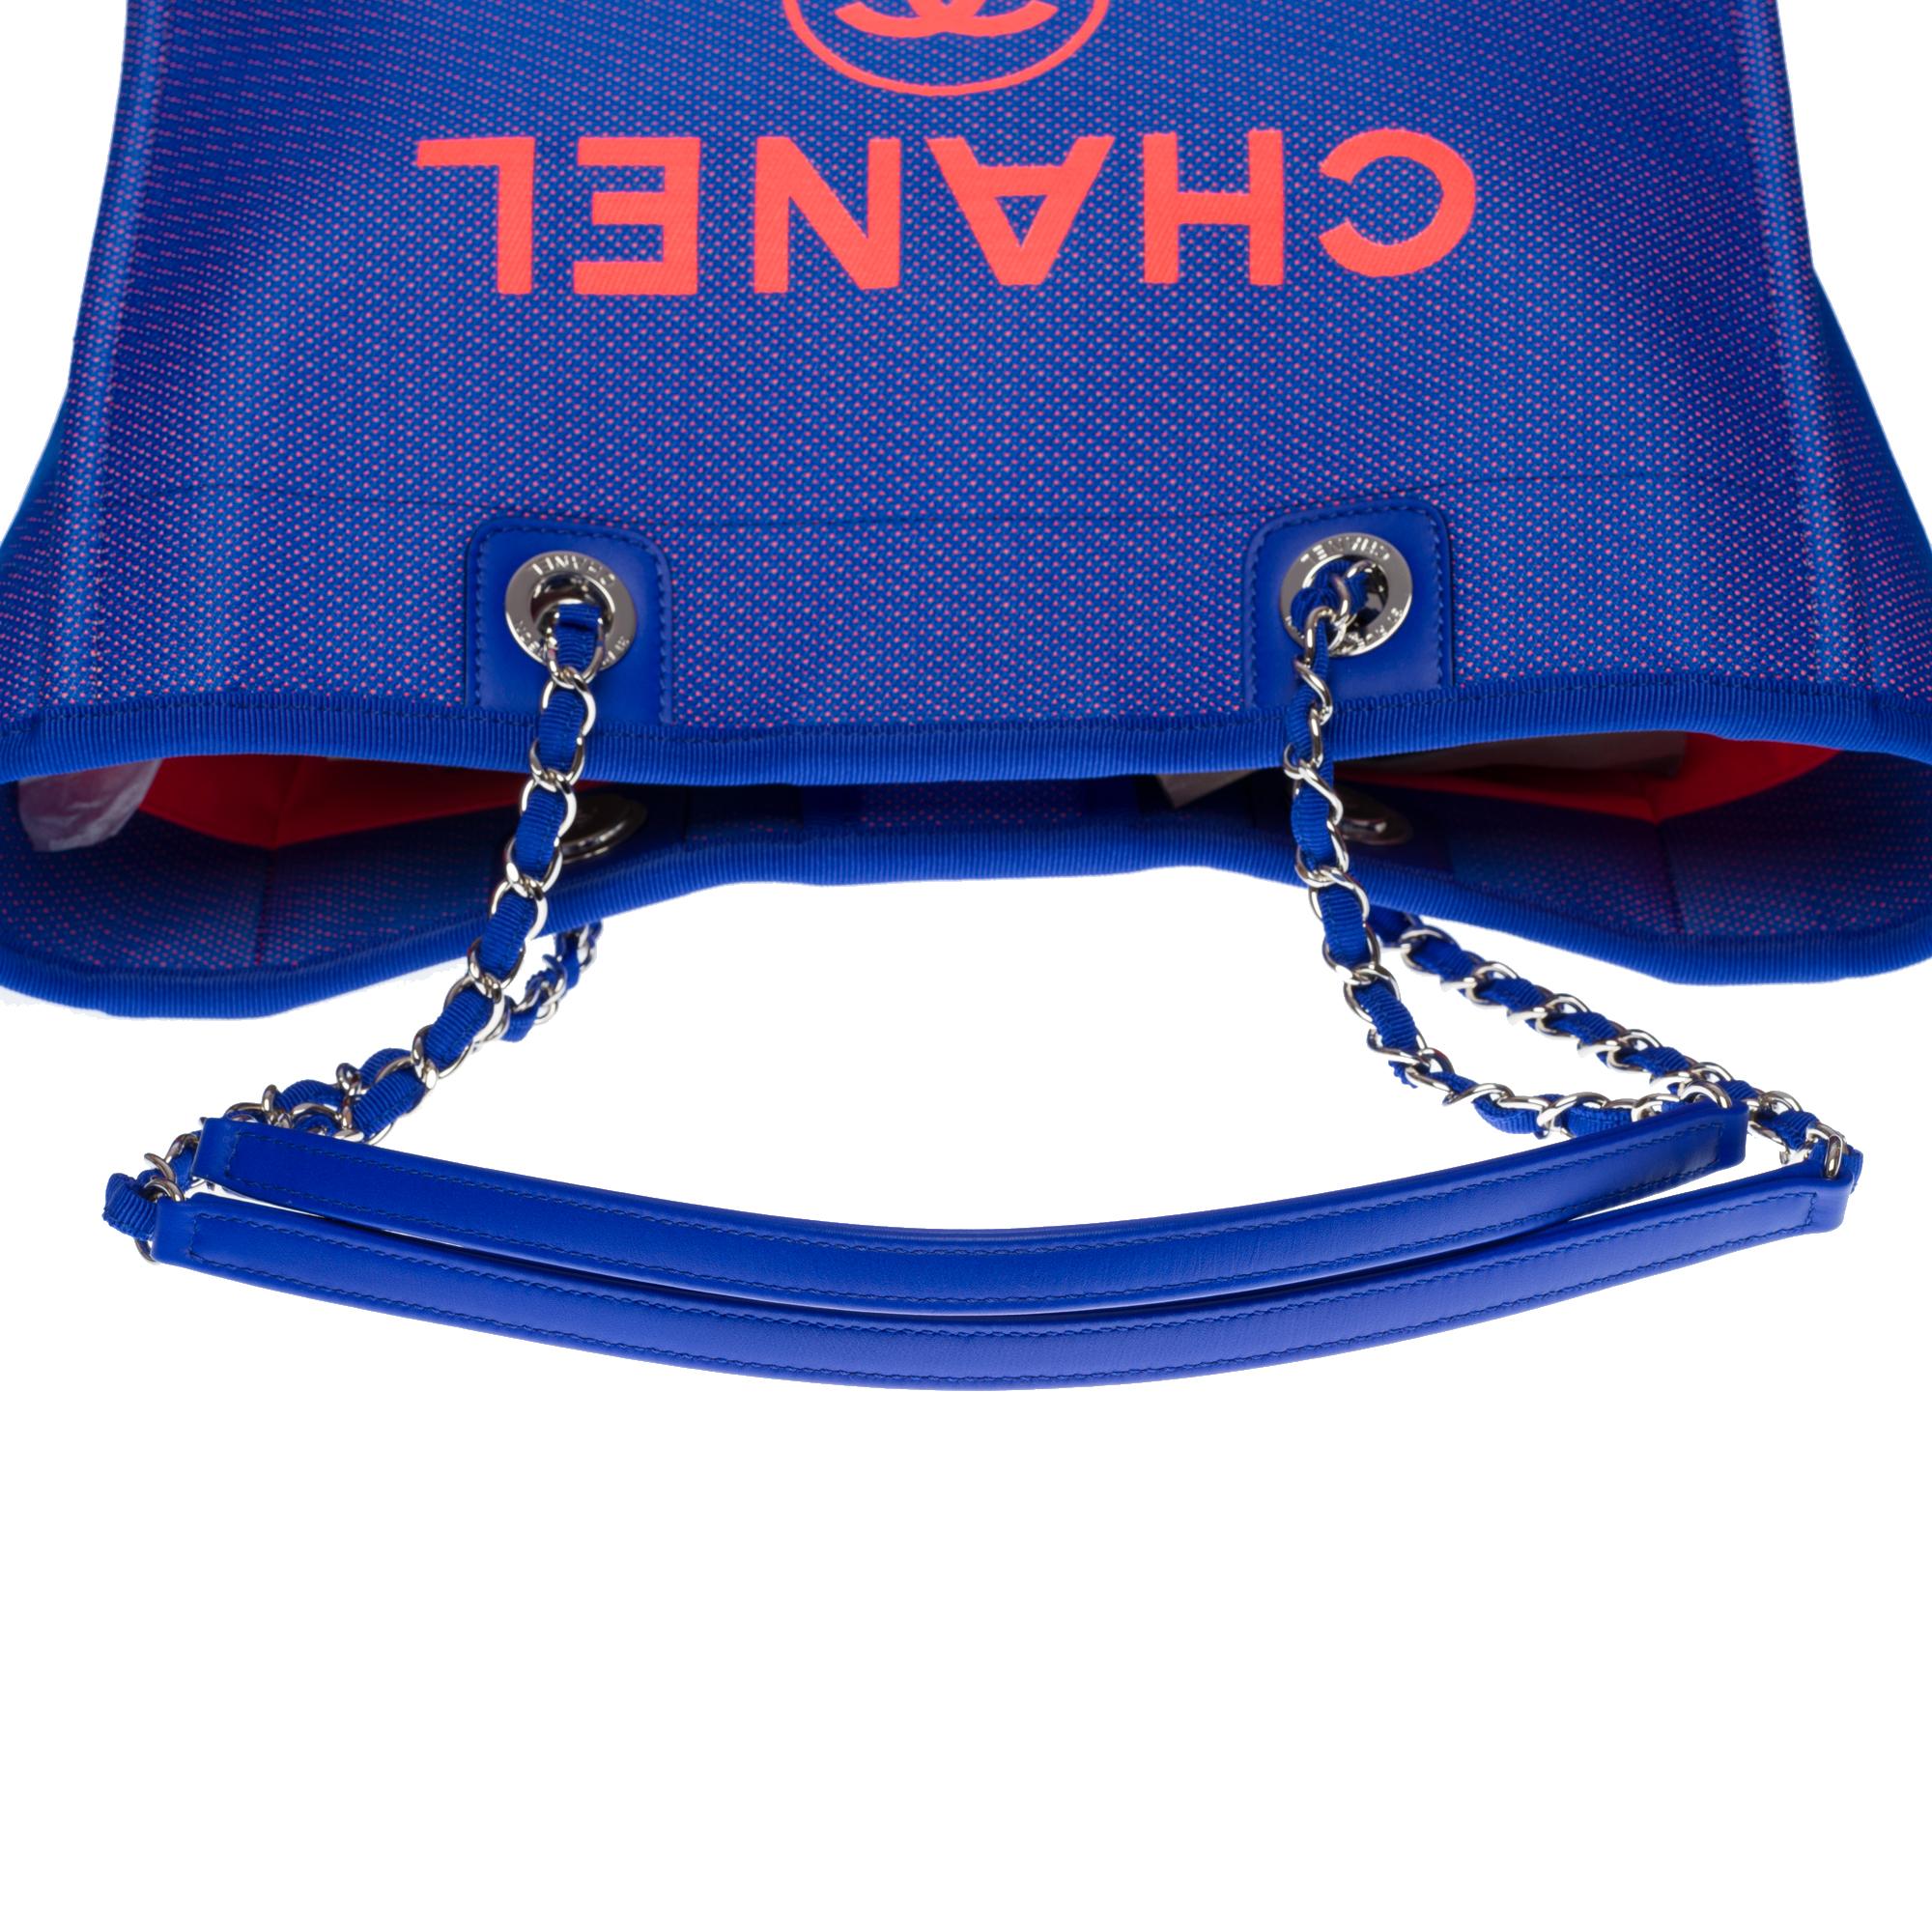 Women's Amazing Chanel Deauville Tote bag in blue electric and orange canvas, SHW